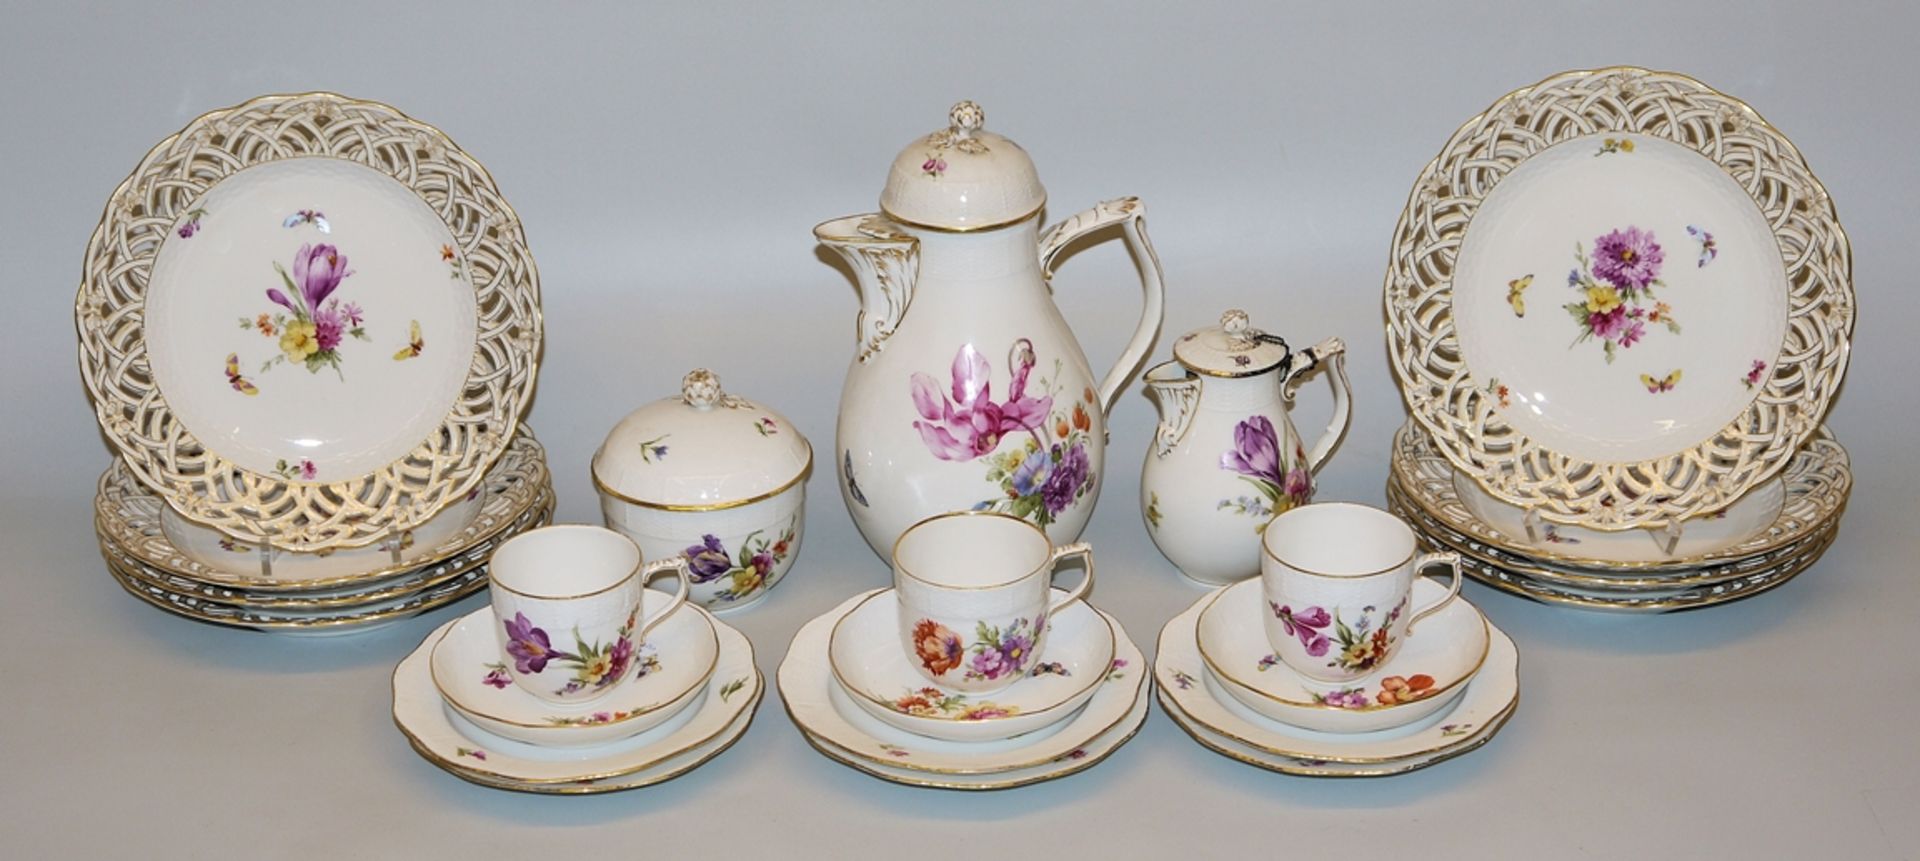 Porcelain rest coffee service & 8 wicker plates shape "Osier" with flowers and insects, KPM, Berlin